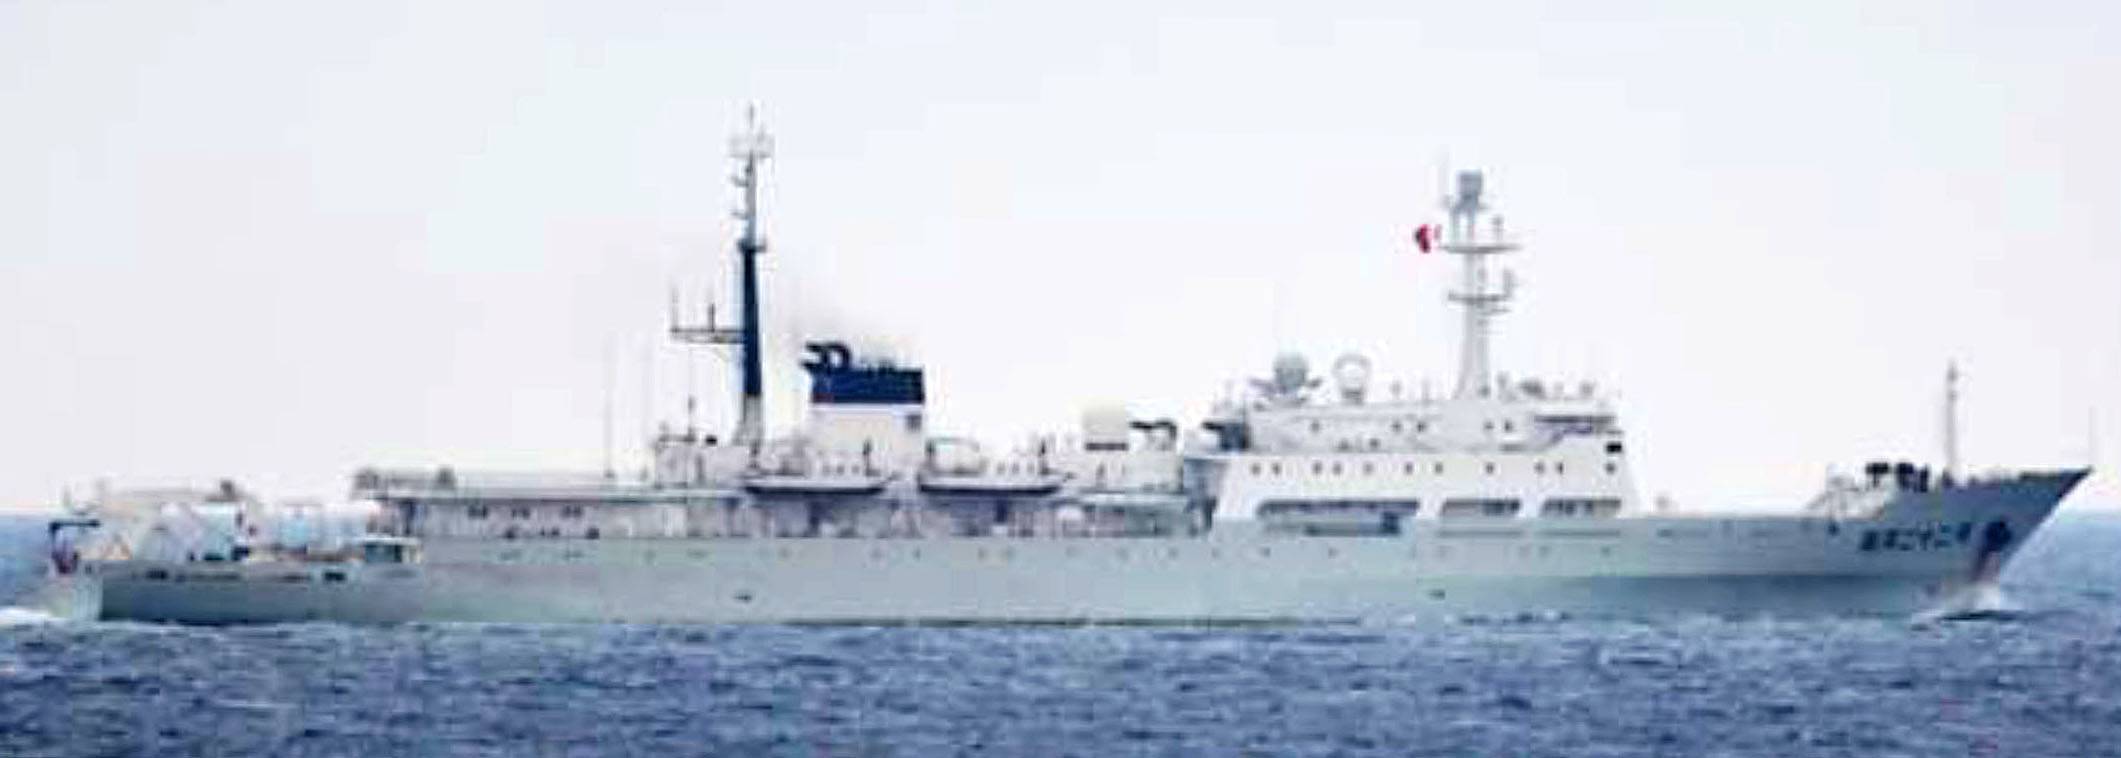 An undated photo shows a Chinese navy survey ship in Japan's territorial waters off Kagoshima Prefecture | DEFENSE MINISTRY / VIA KYODO